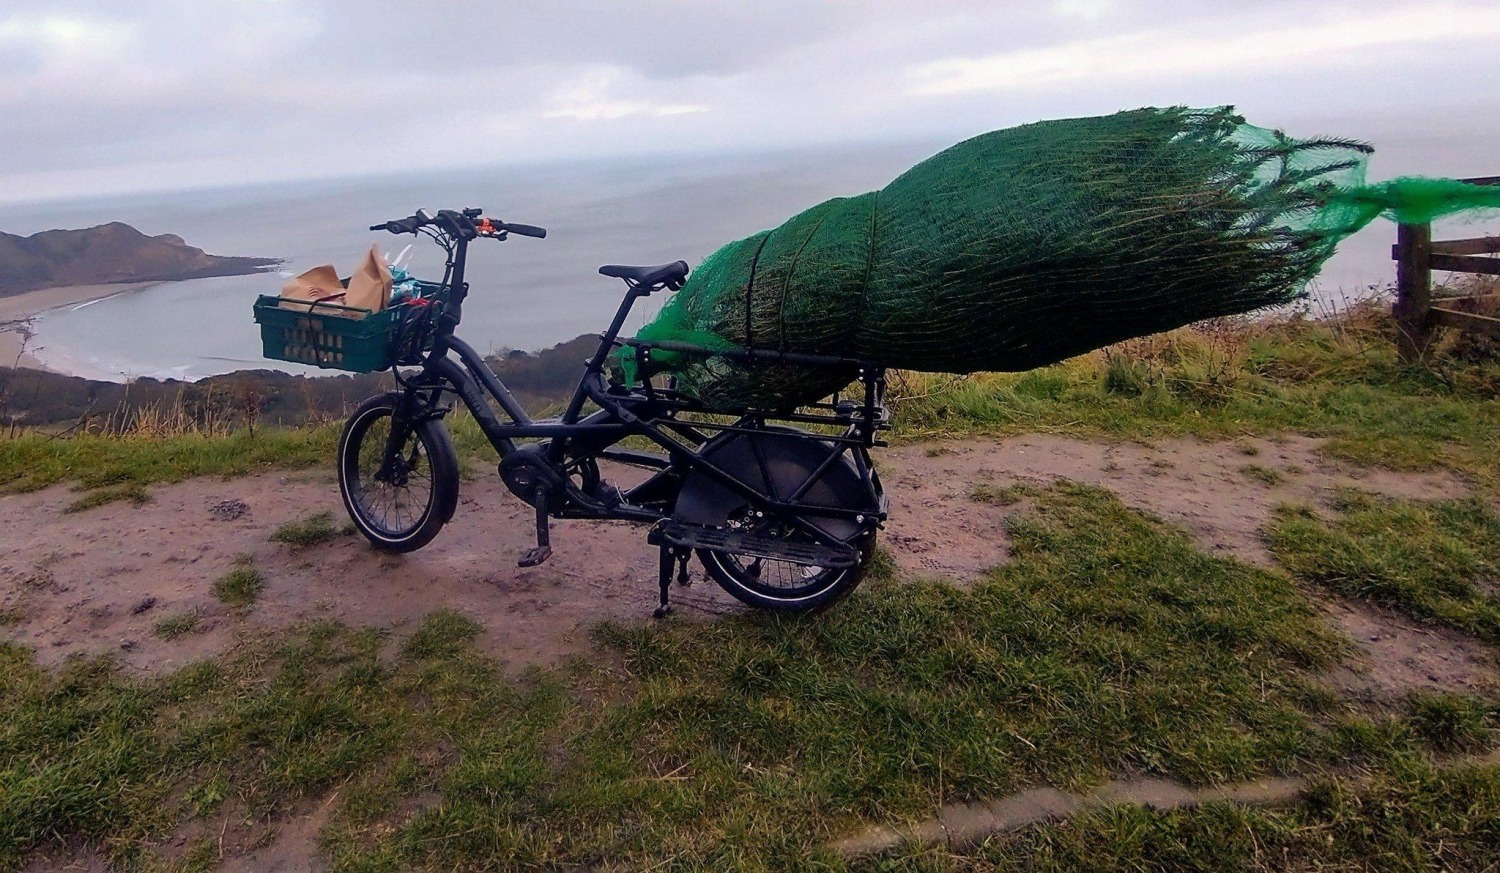 How to carry a tree home by cargo bike